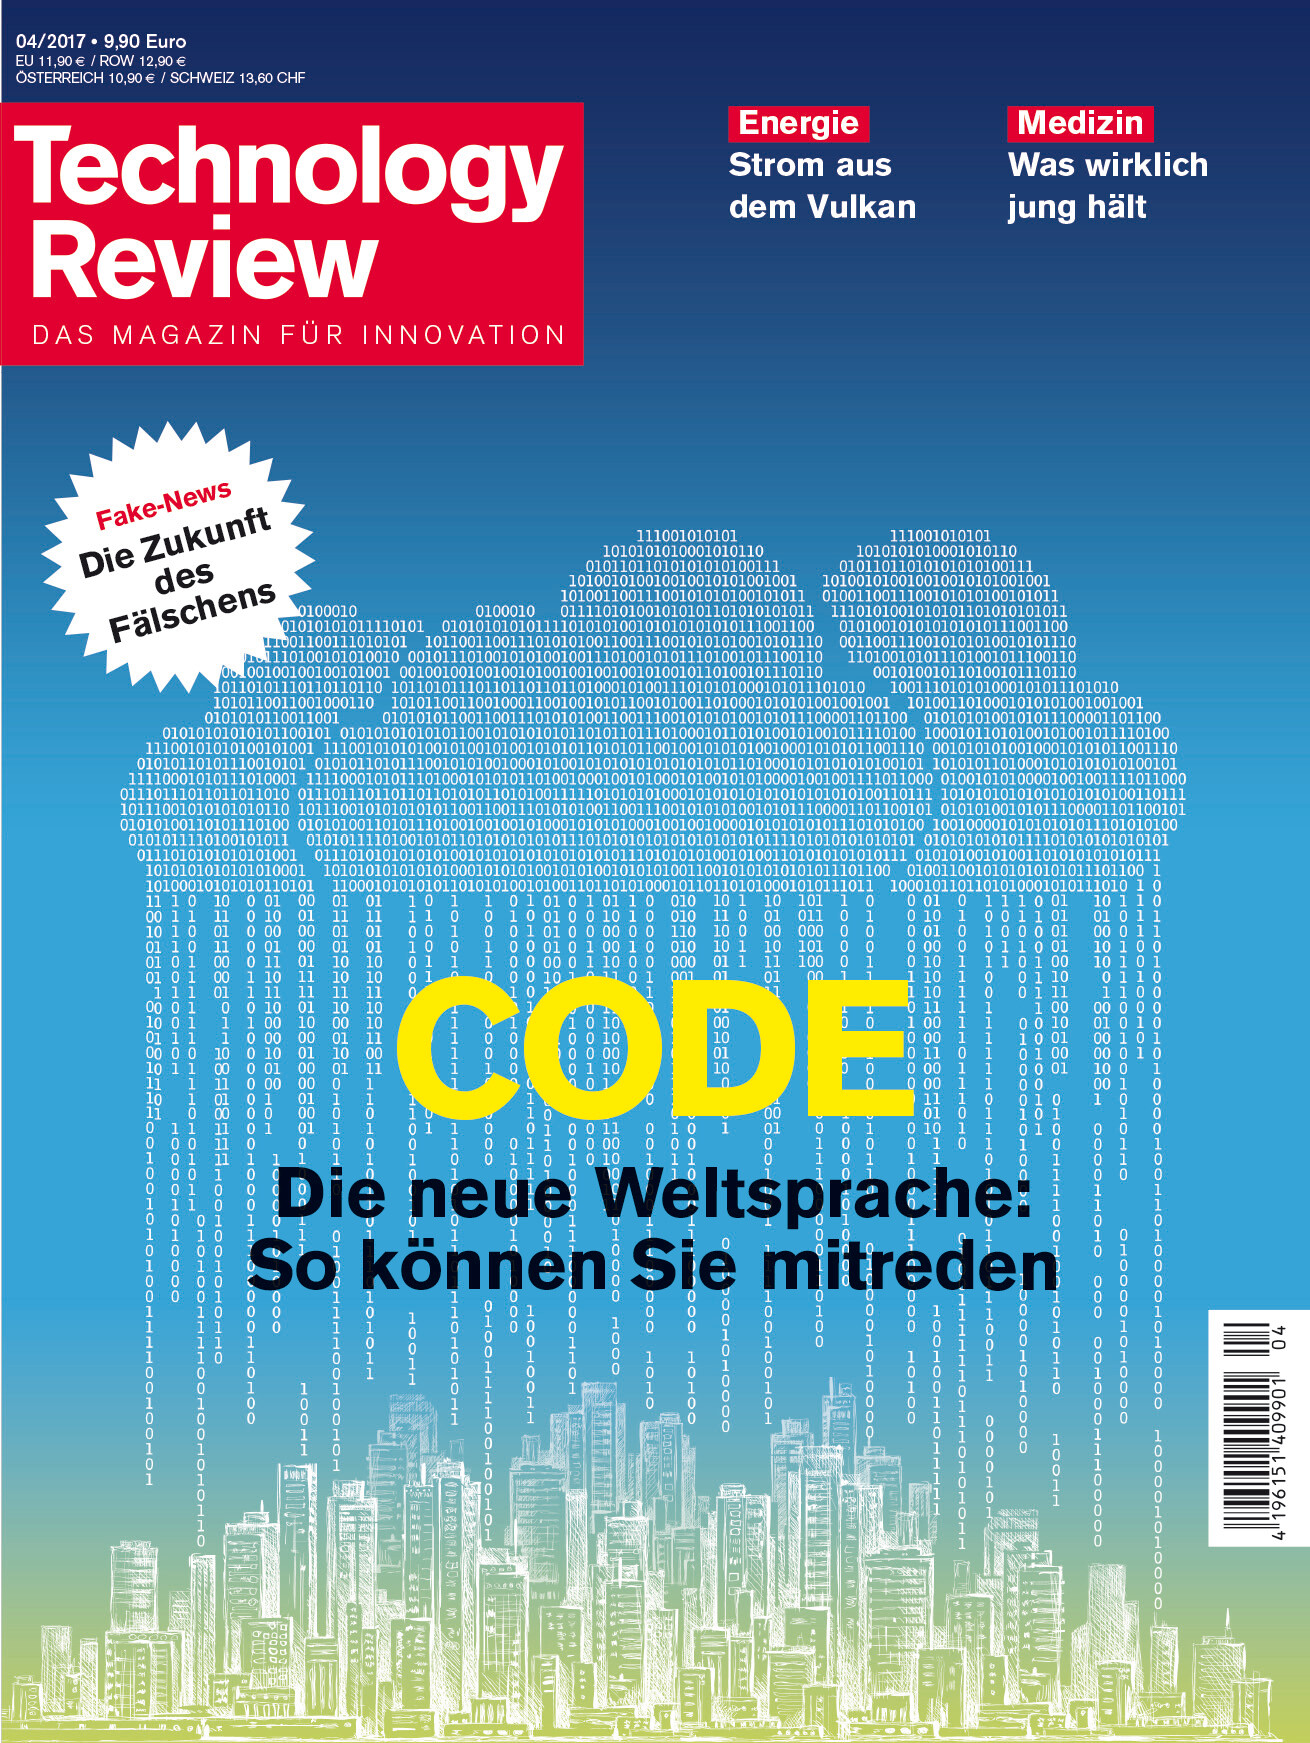 Technology Review 4/2017